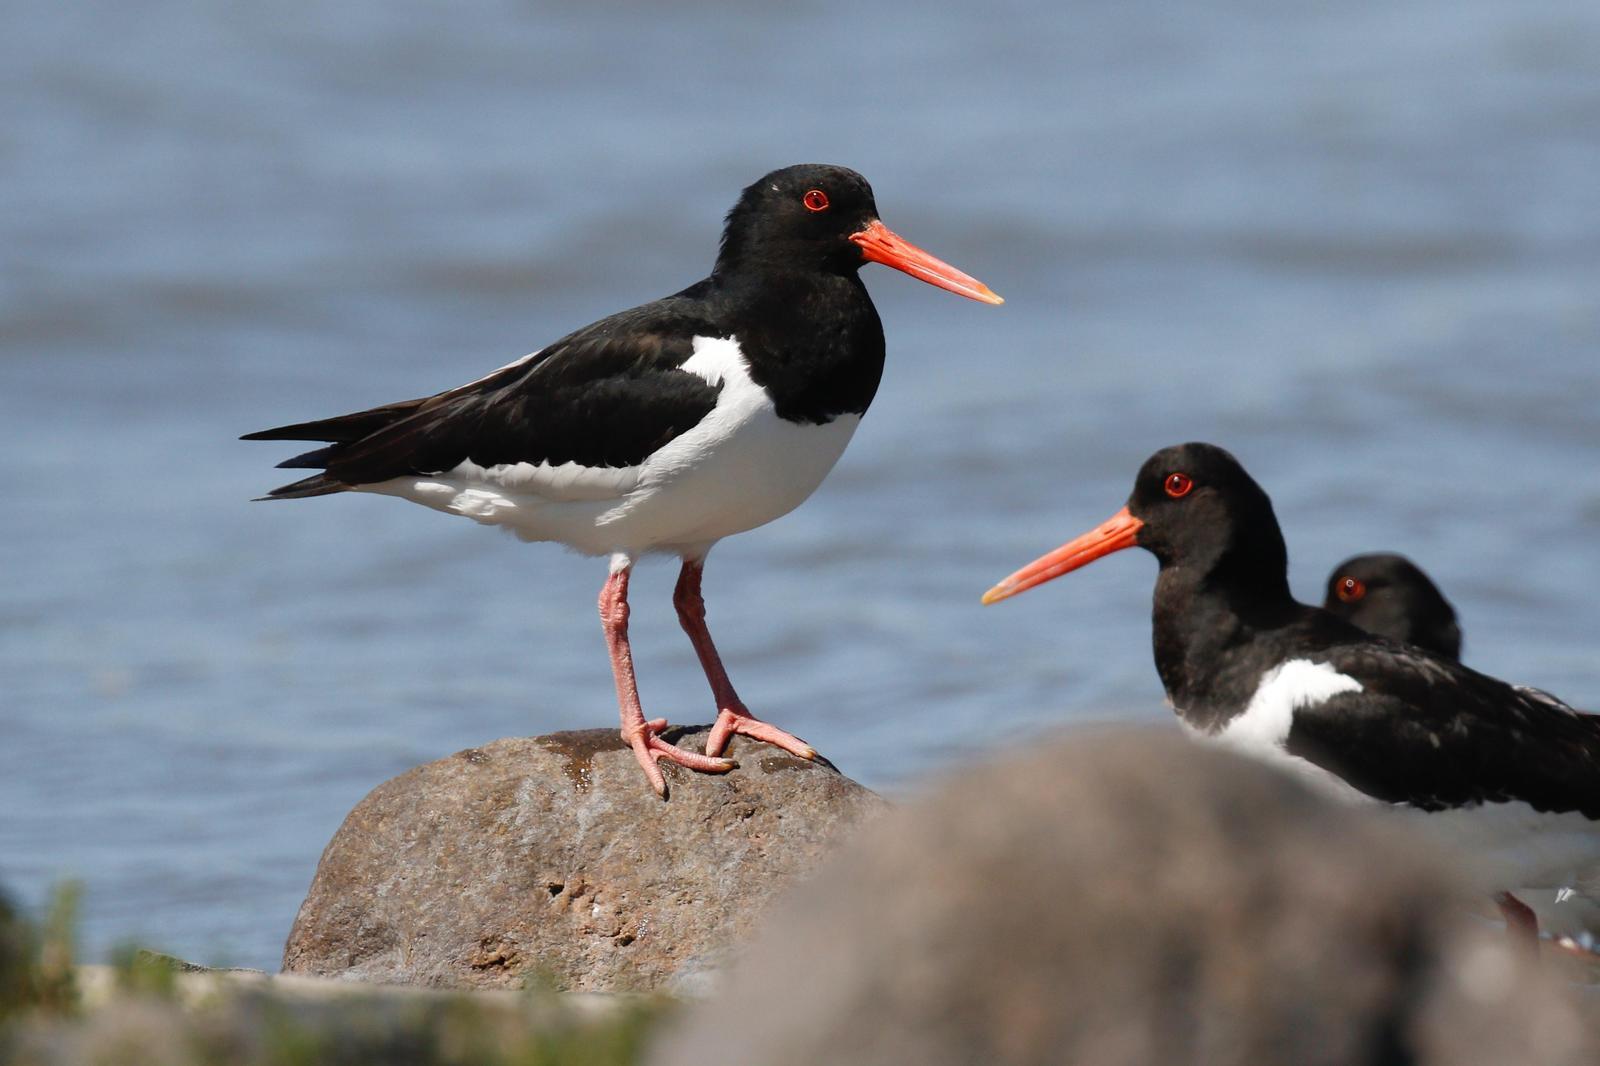 Eurasian Oystercatcher Photo by Emily Willoughby